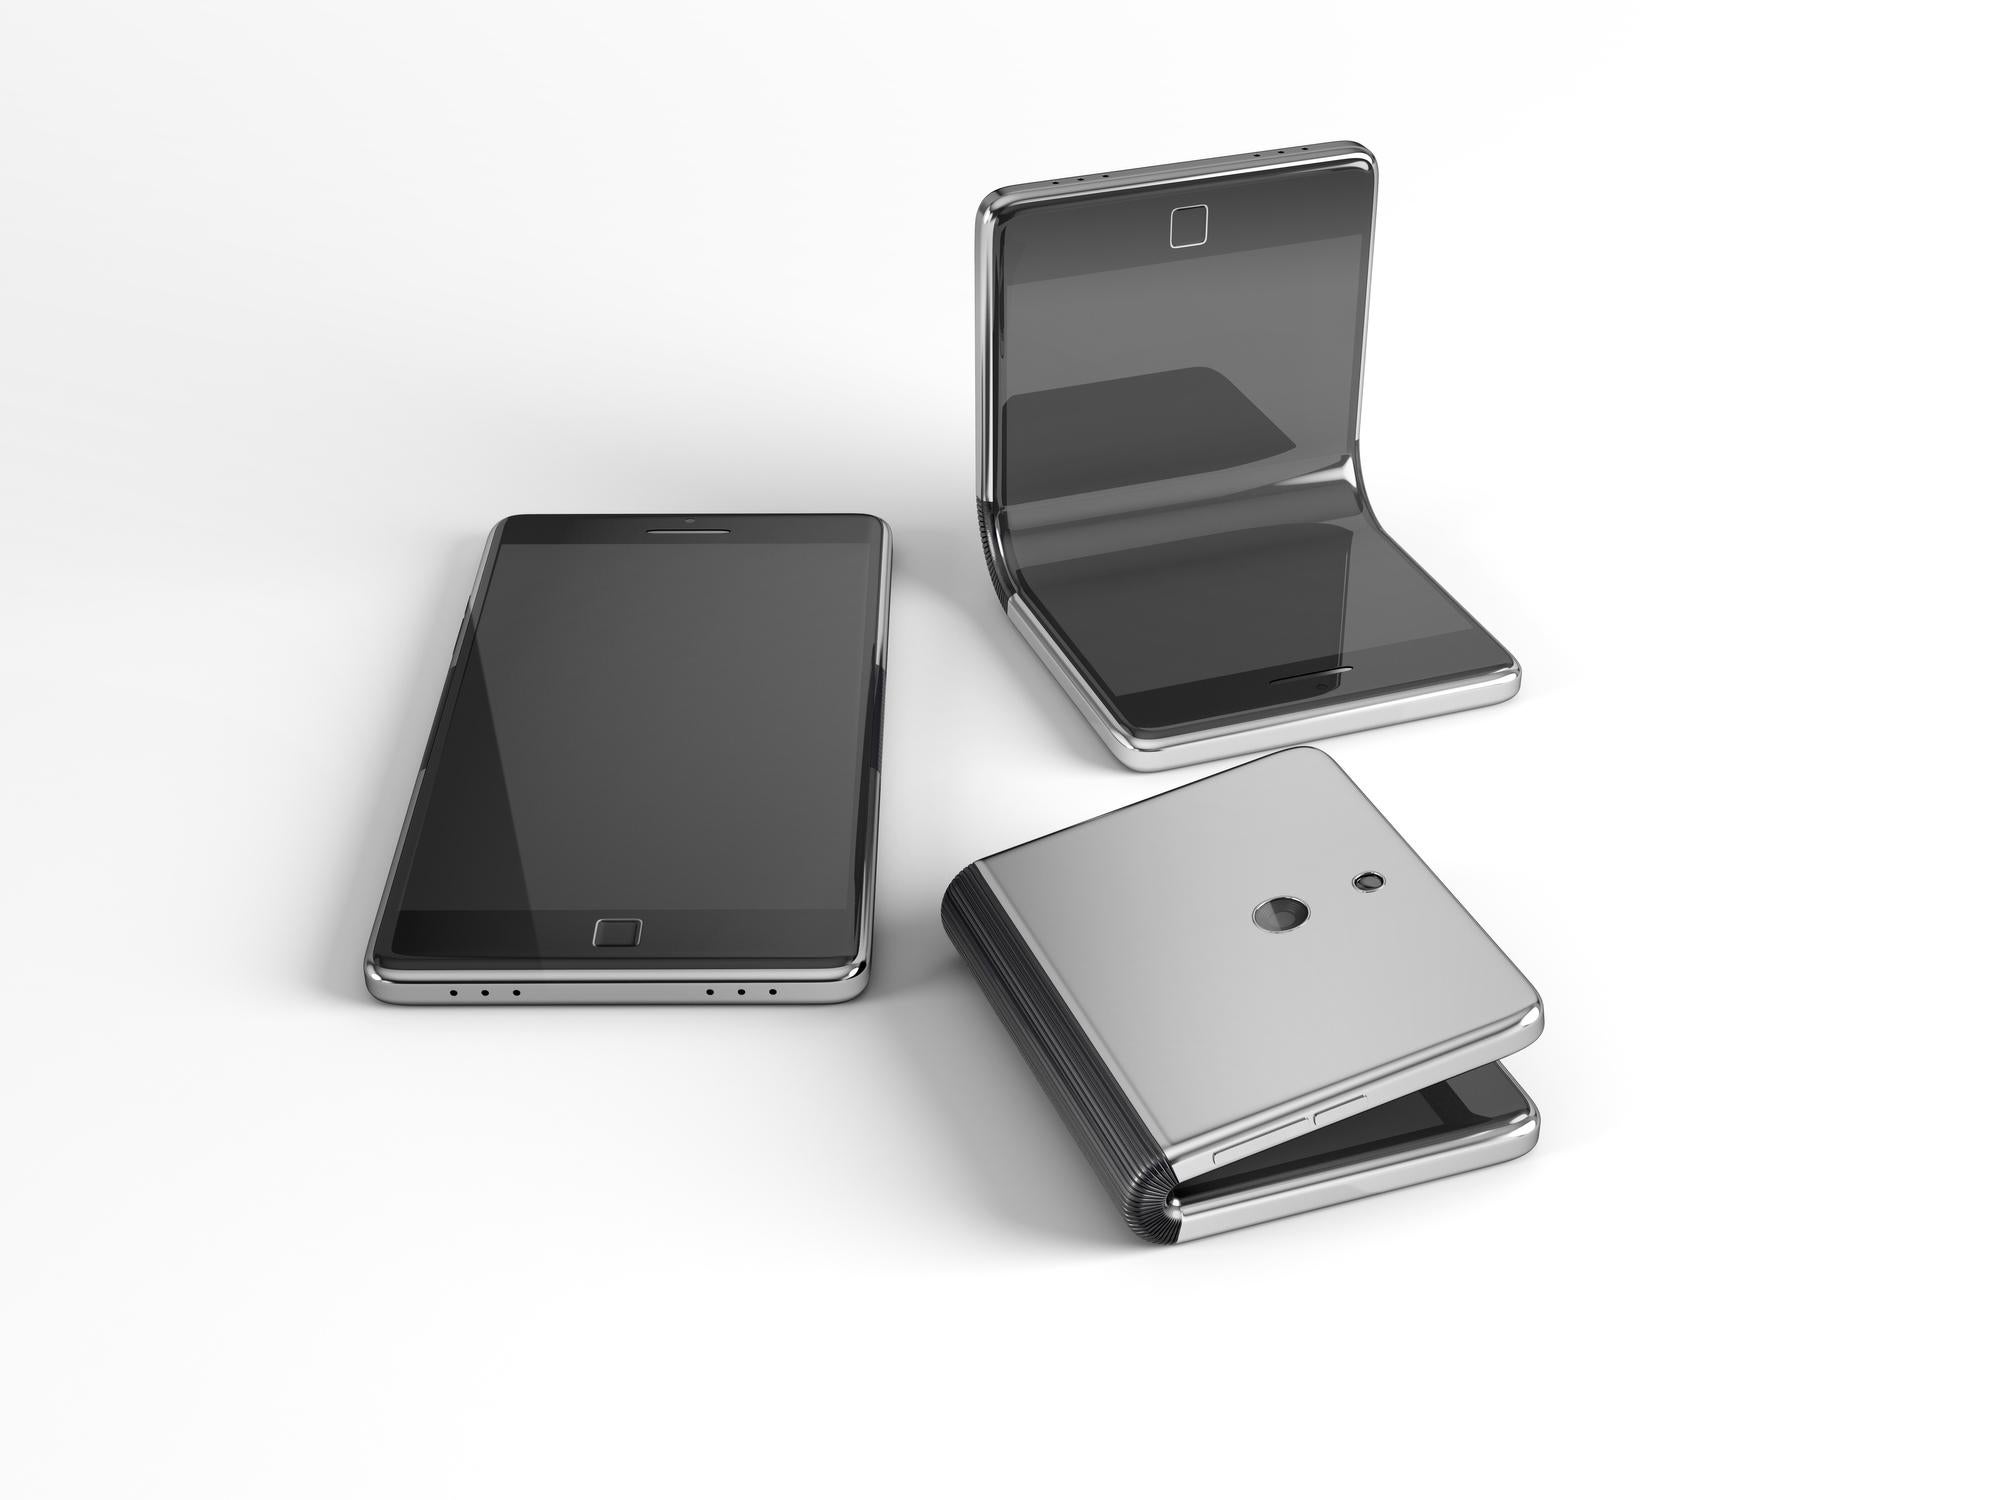 A concept for a foldable smartphone, which could be similar to the Samsung 'Galaxy X'